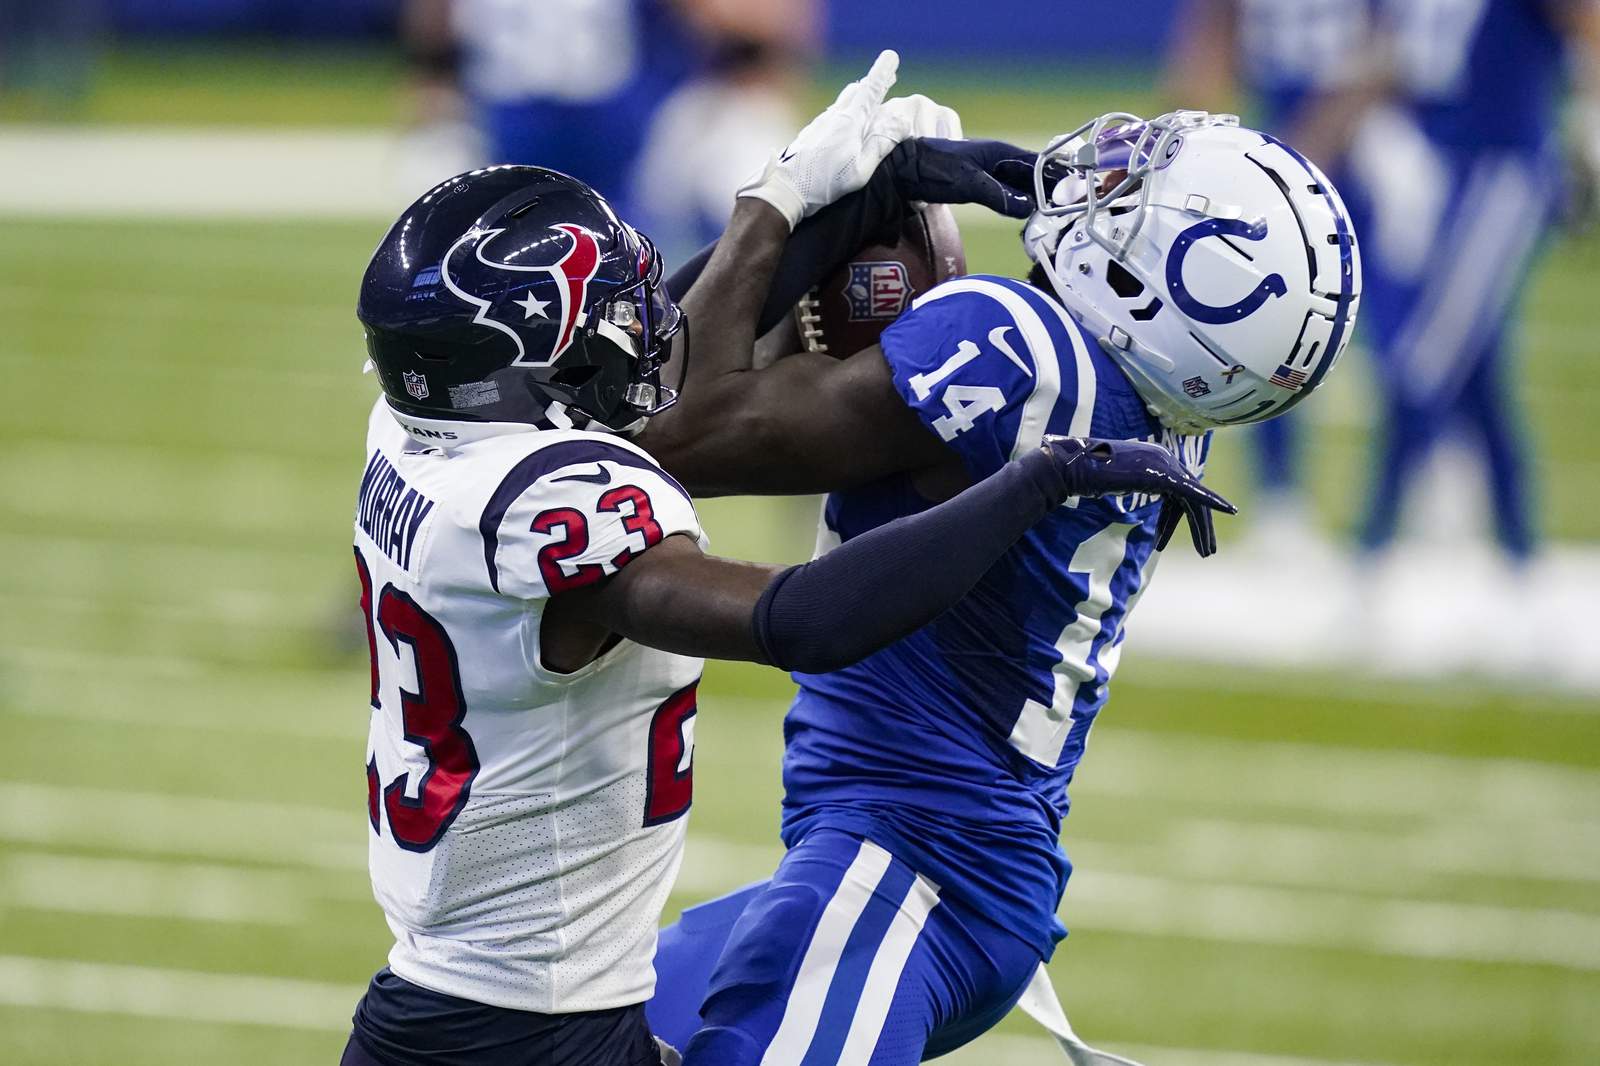 Colts recover another late fumble, beat Texans 27-20